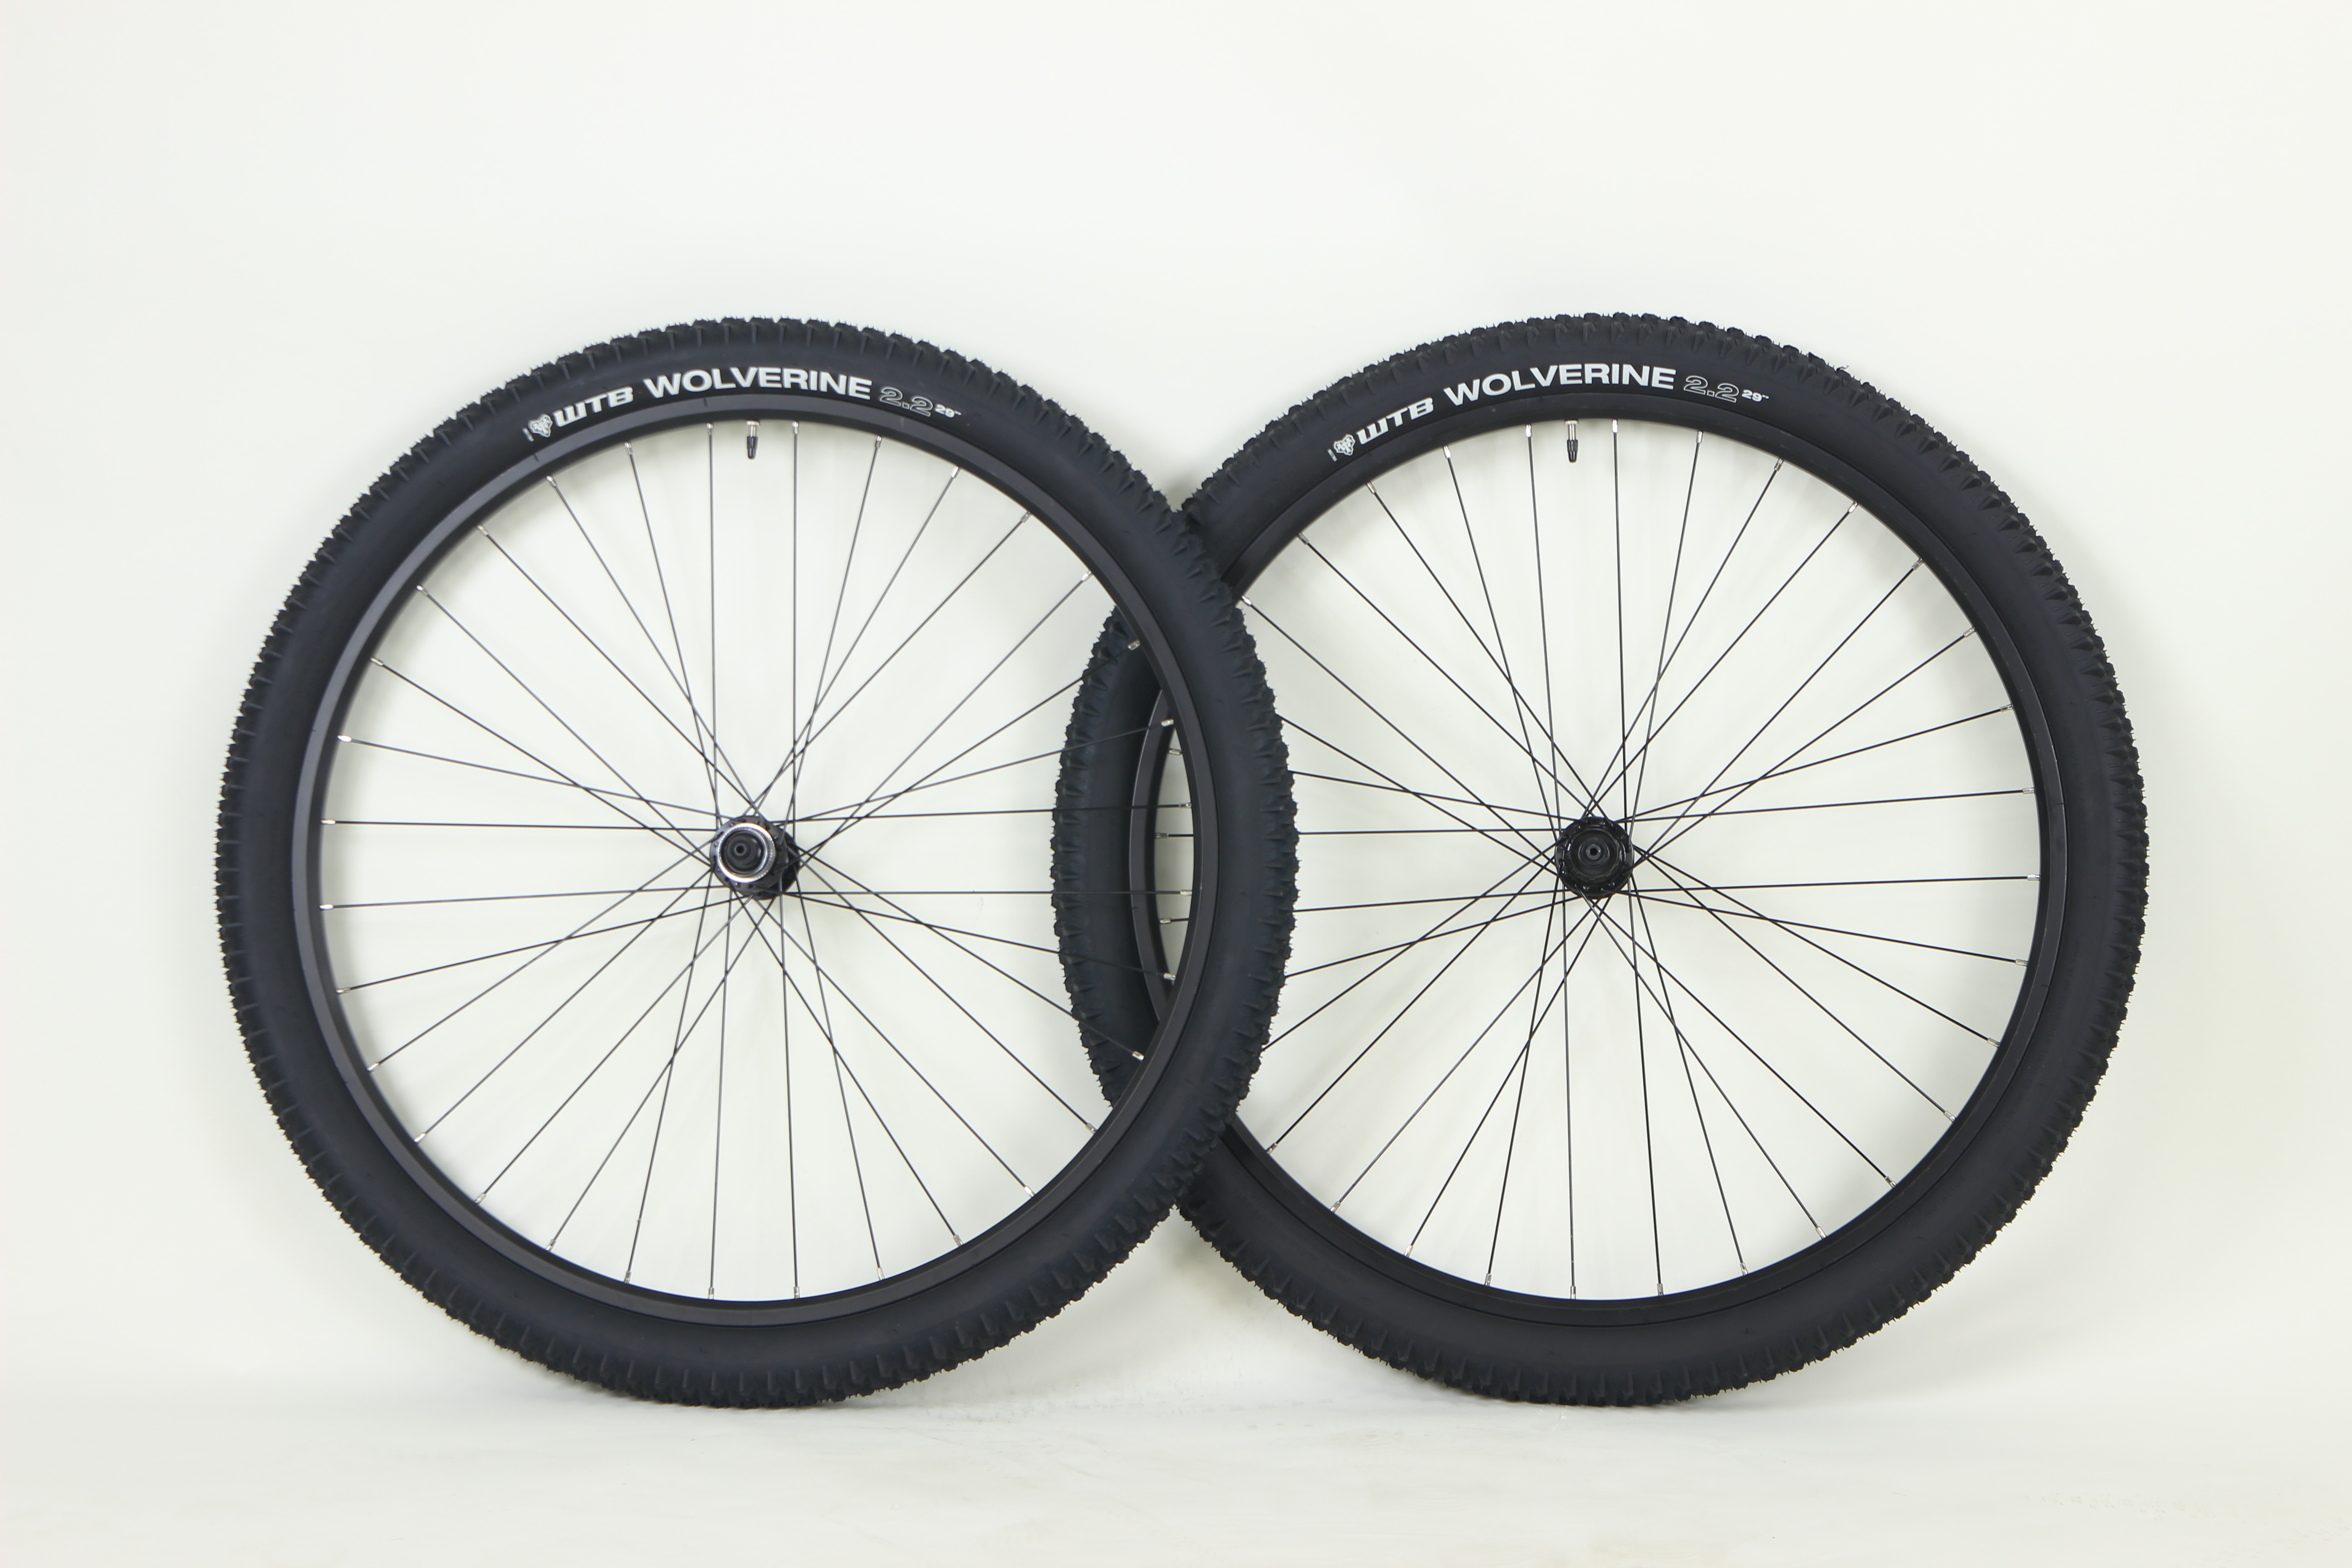 Wheels 29 inch Alloy Wheels ATB Centerlock 29 x 2.2 Maxxis Wolverine Tire and Tube Image